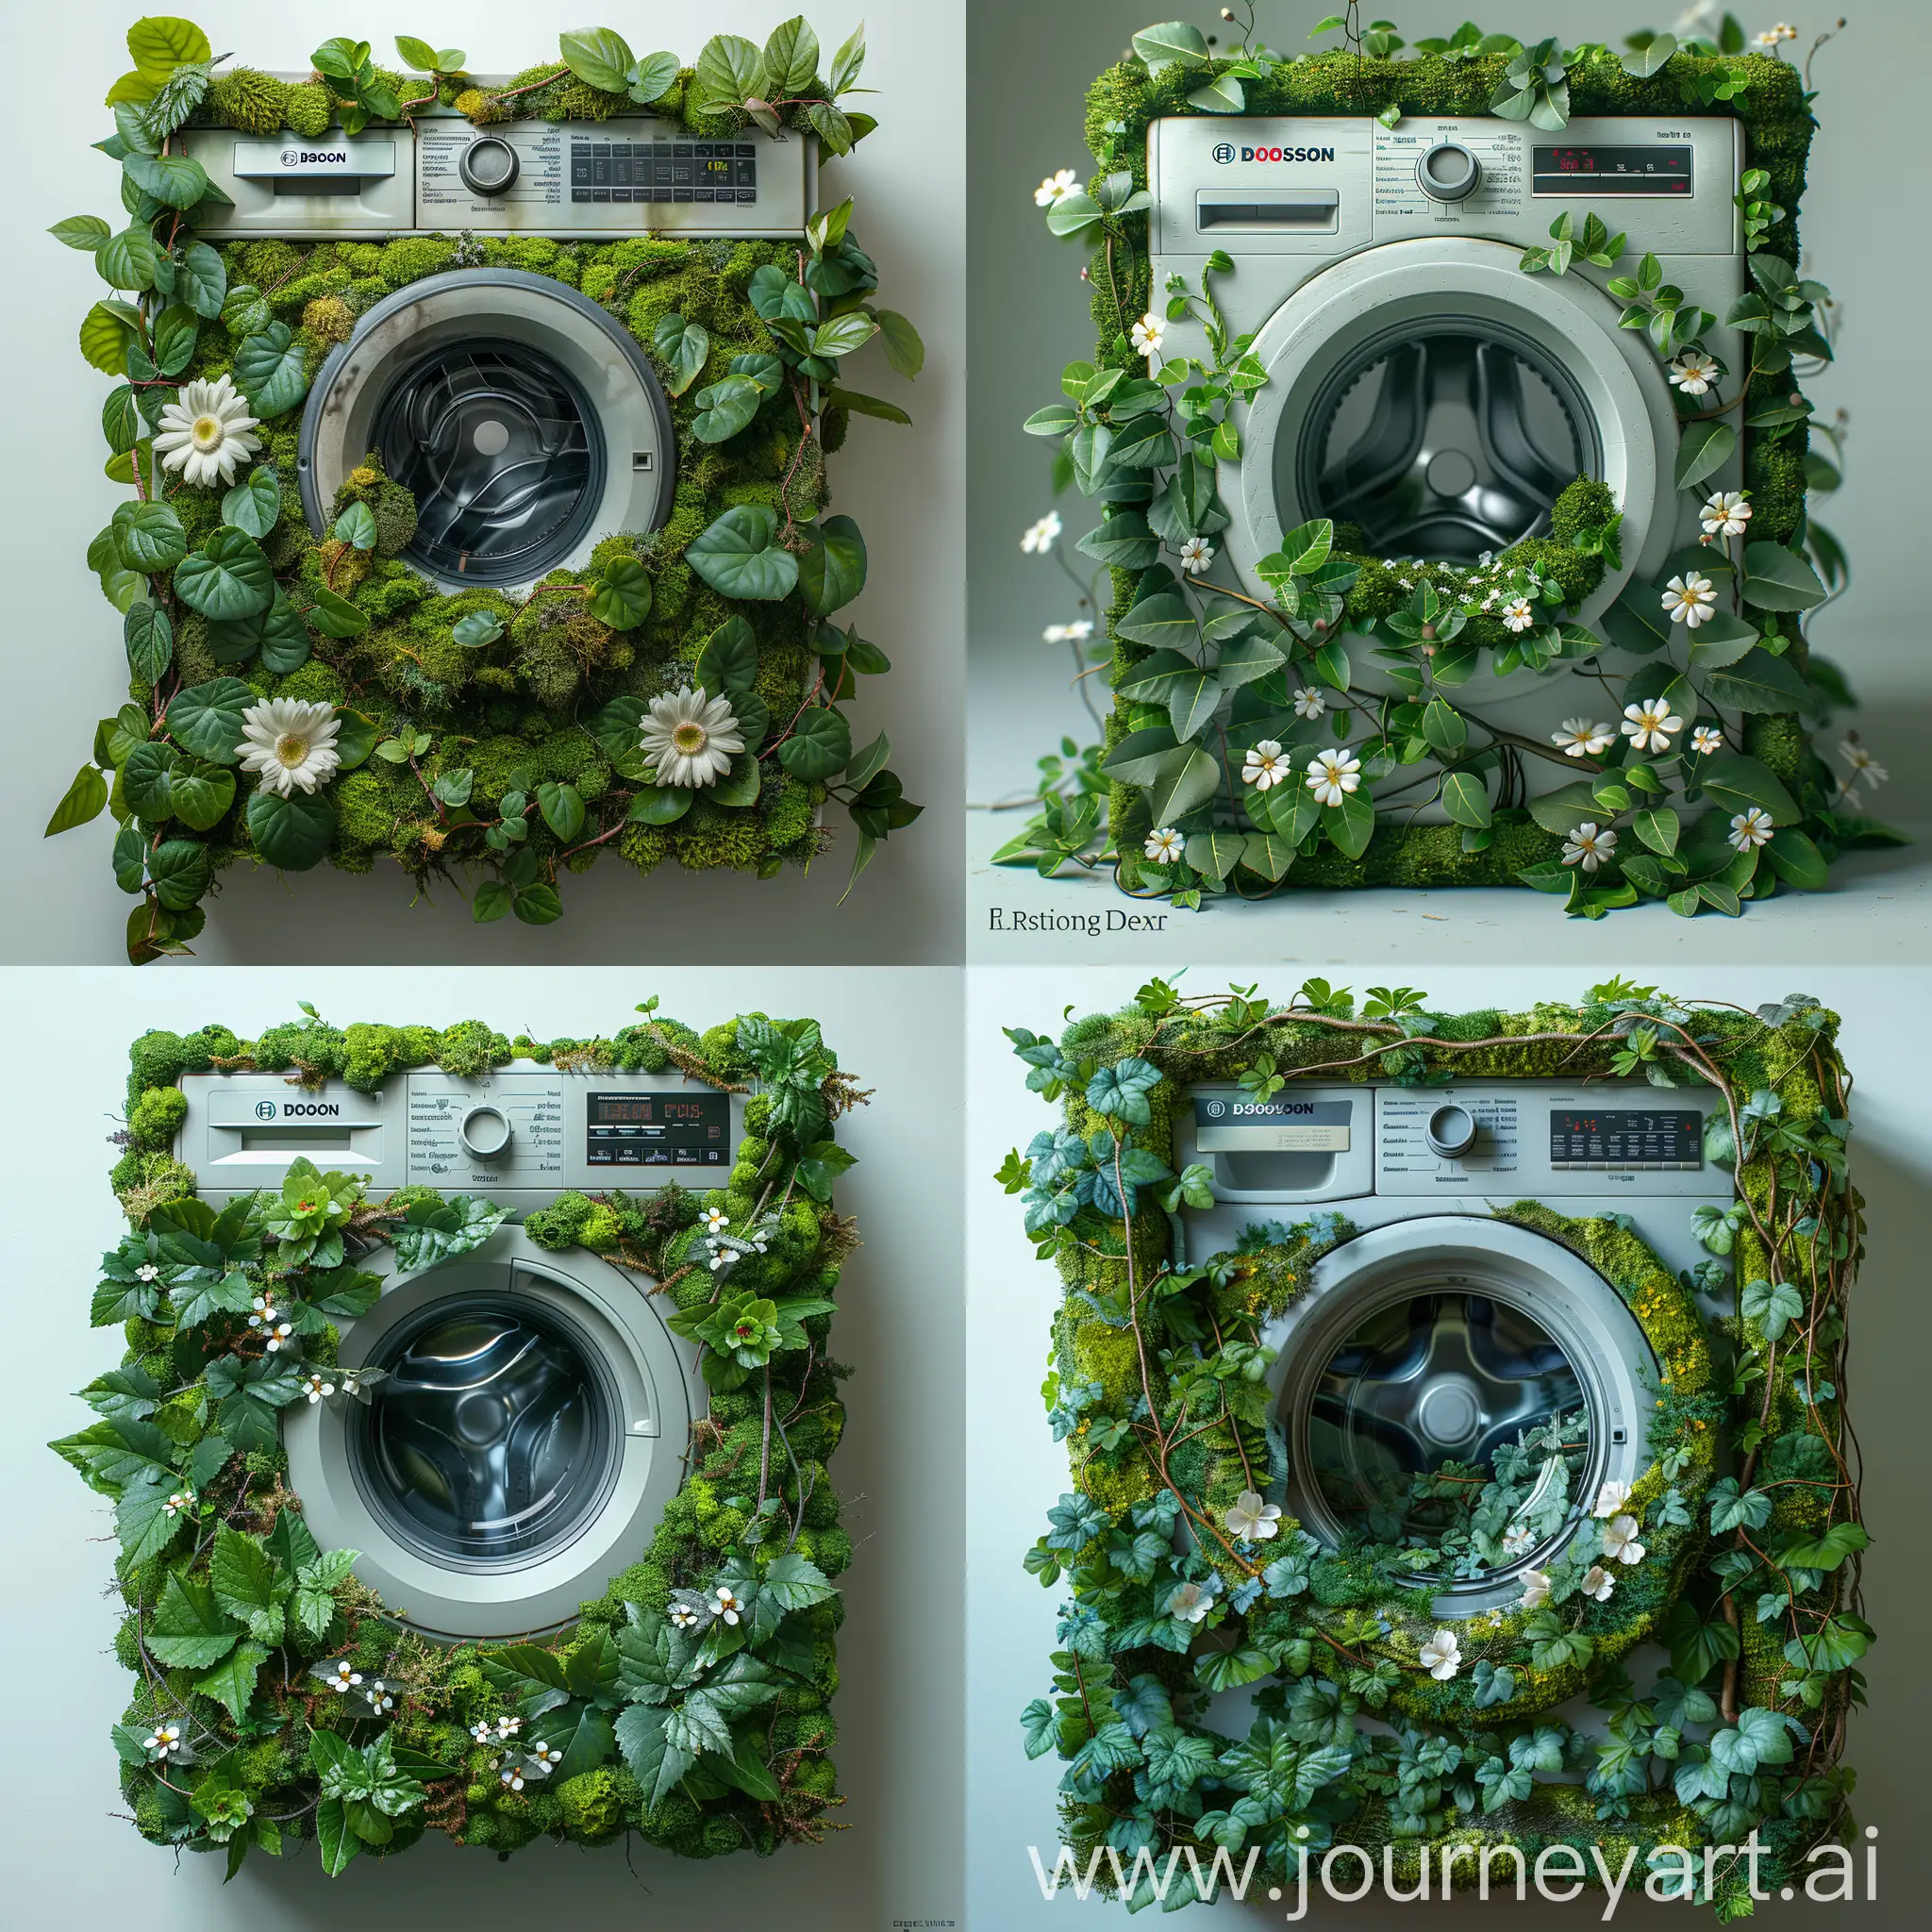 Green-Leaf-Bosch-Washing-Machine-with-Moss-and-Flowers-on-White-Background